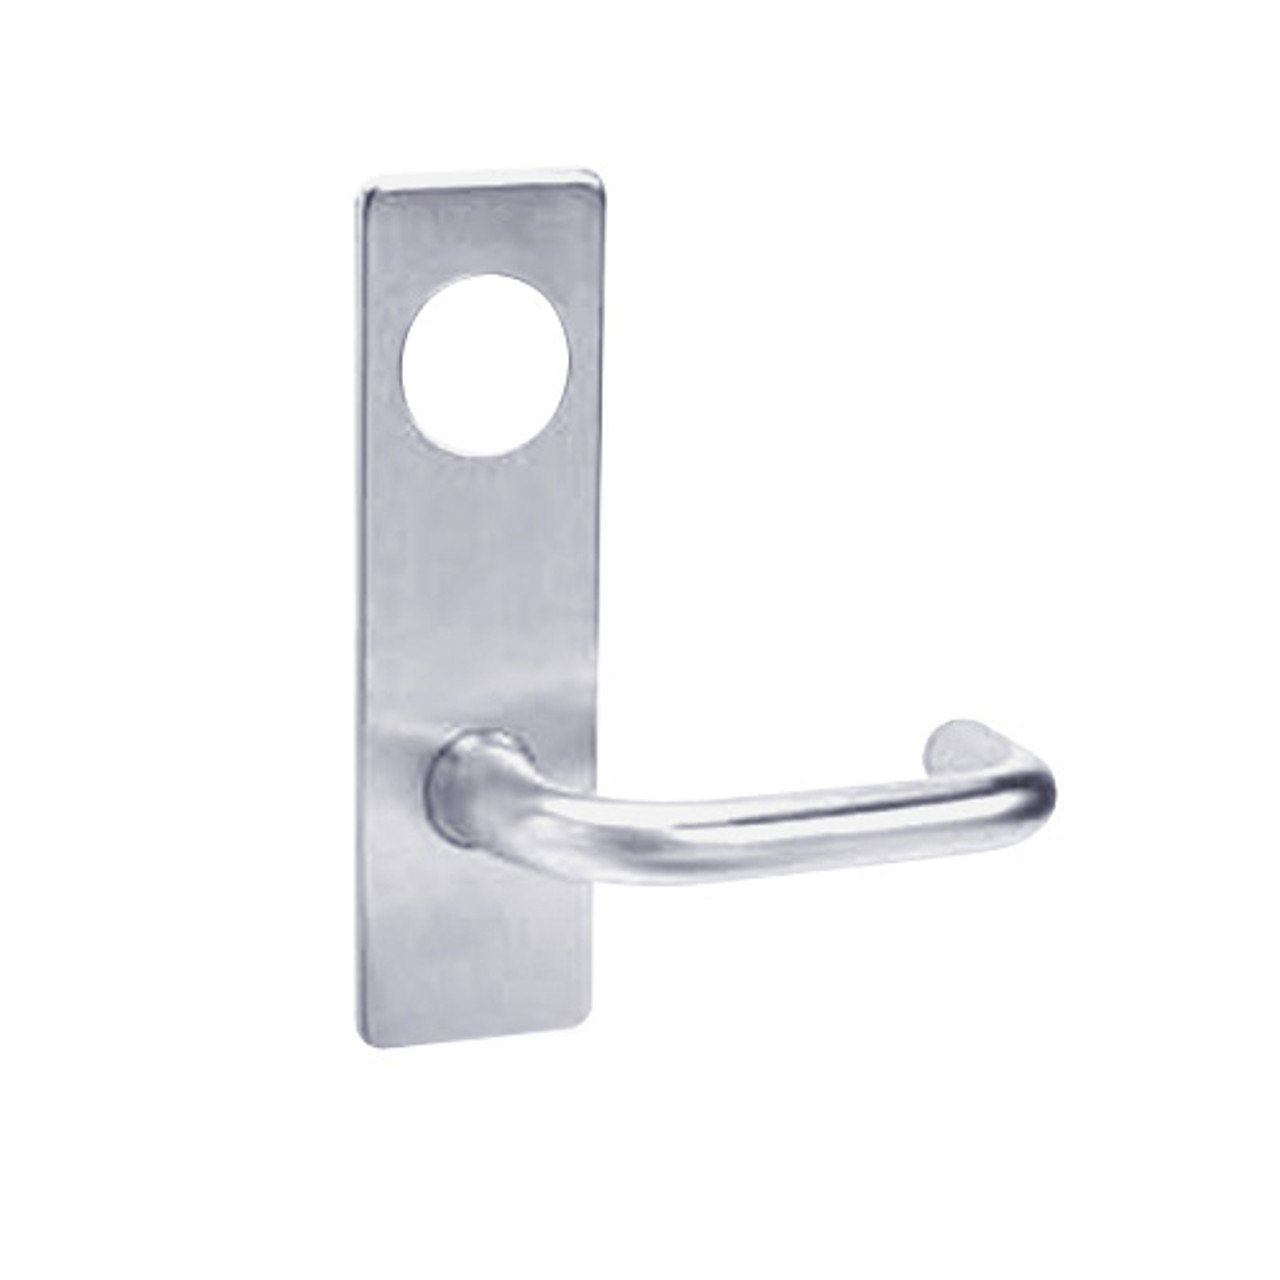 ML2056-LSP-626-M31 Corbin Russwin ML2000 Series Mortise Classroom Trim Pack with Lustra Lever in Satin Chrome